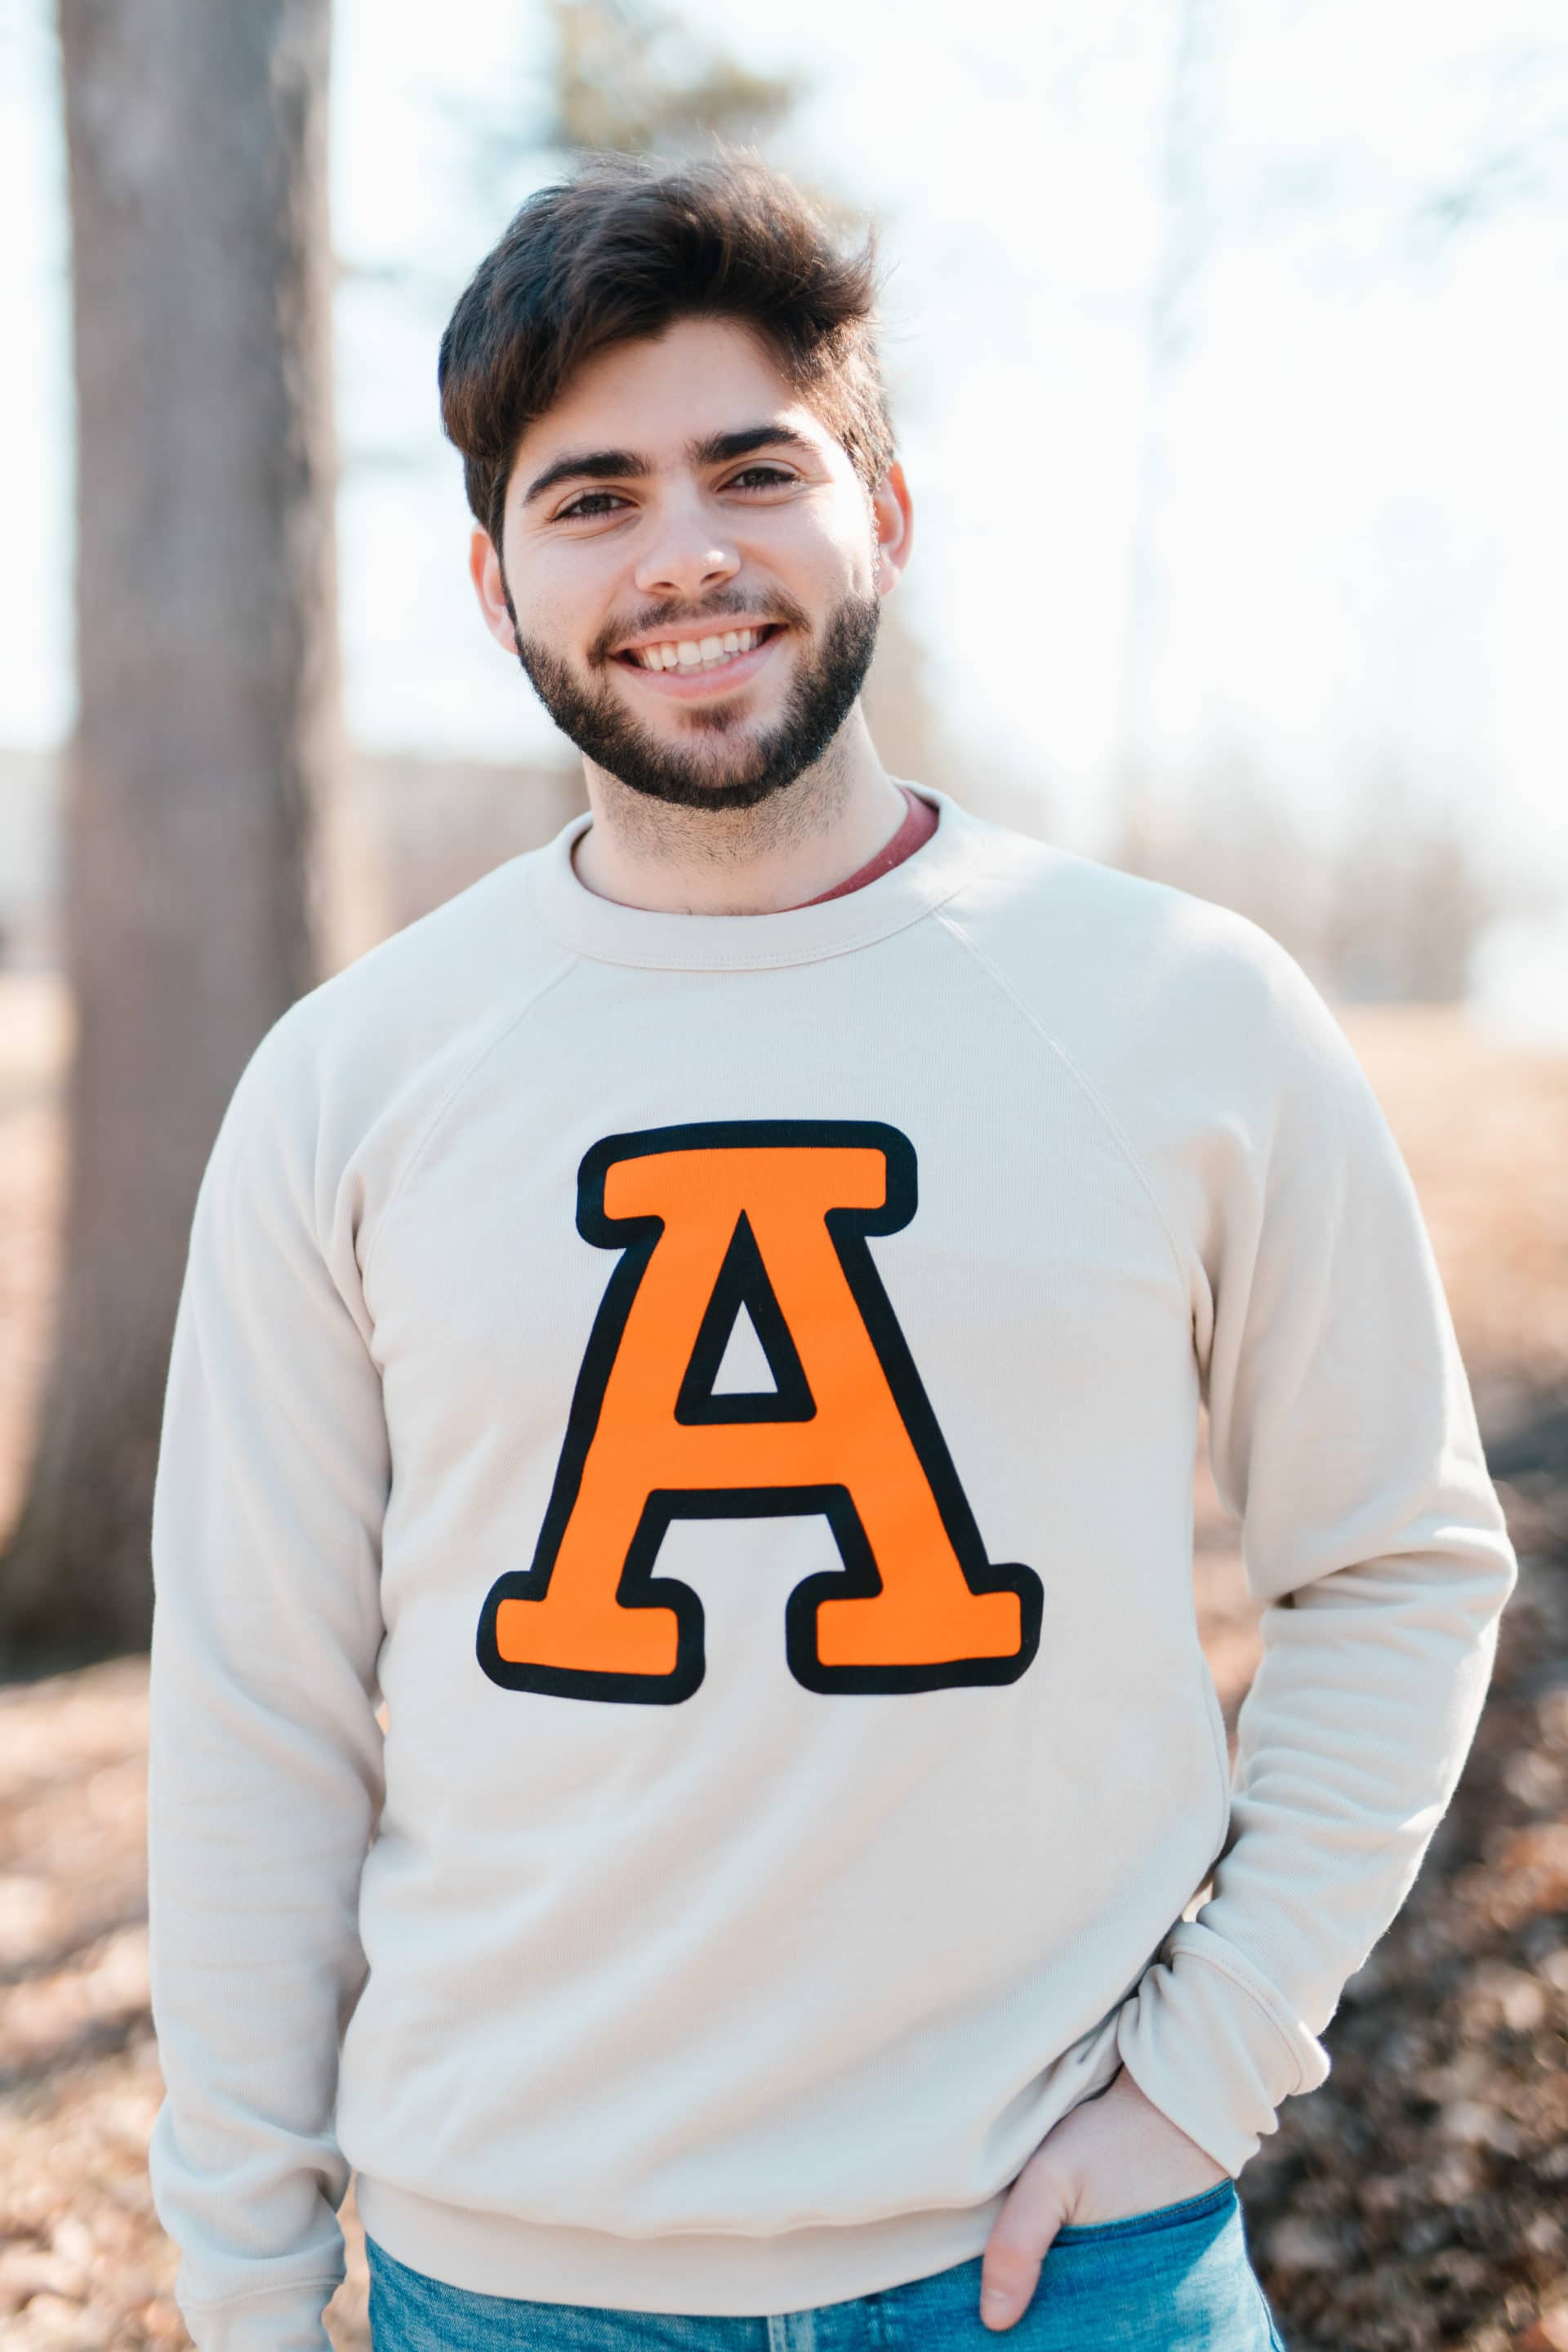 Student at Anderson University Indiana